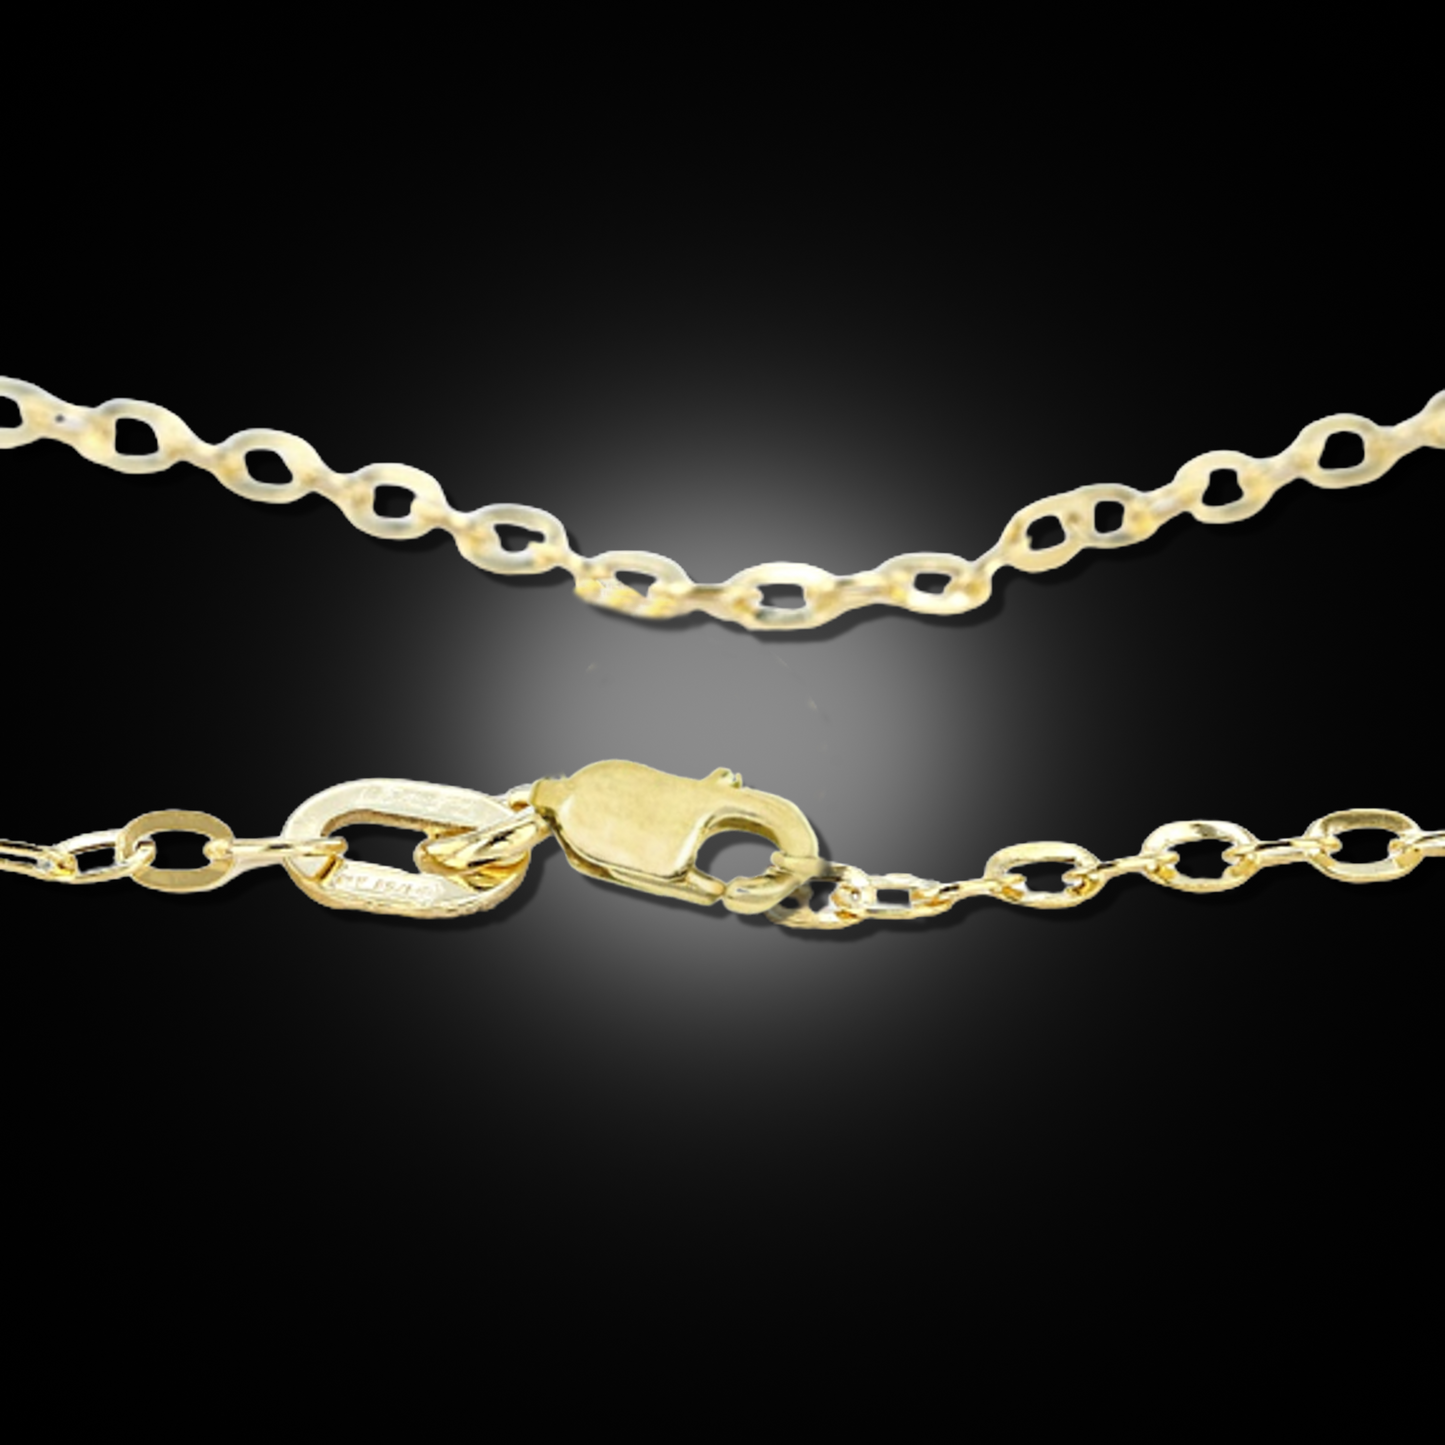 14k Gold Mirror Rolo Necklace